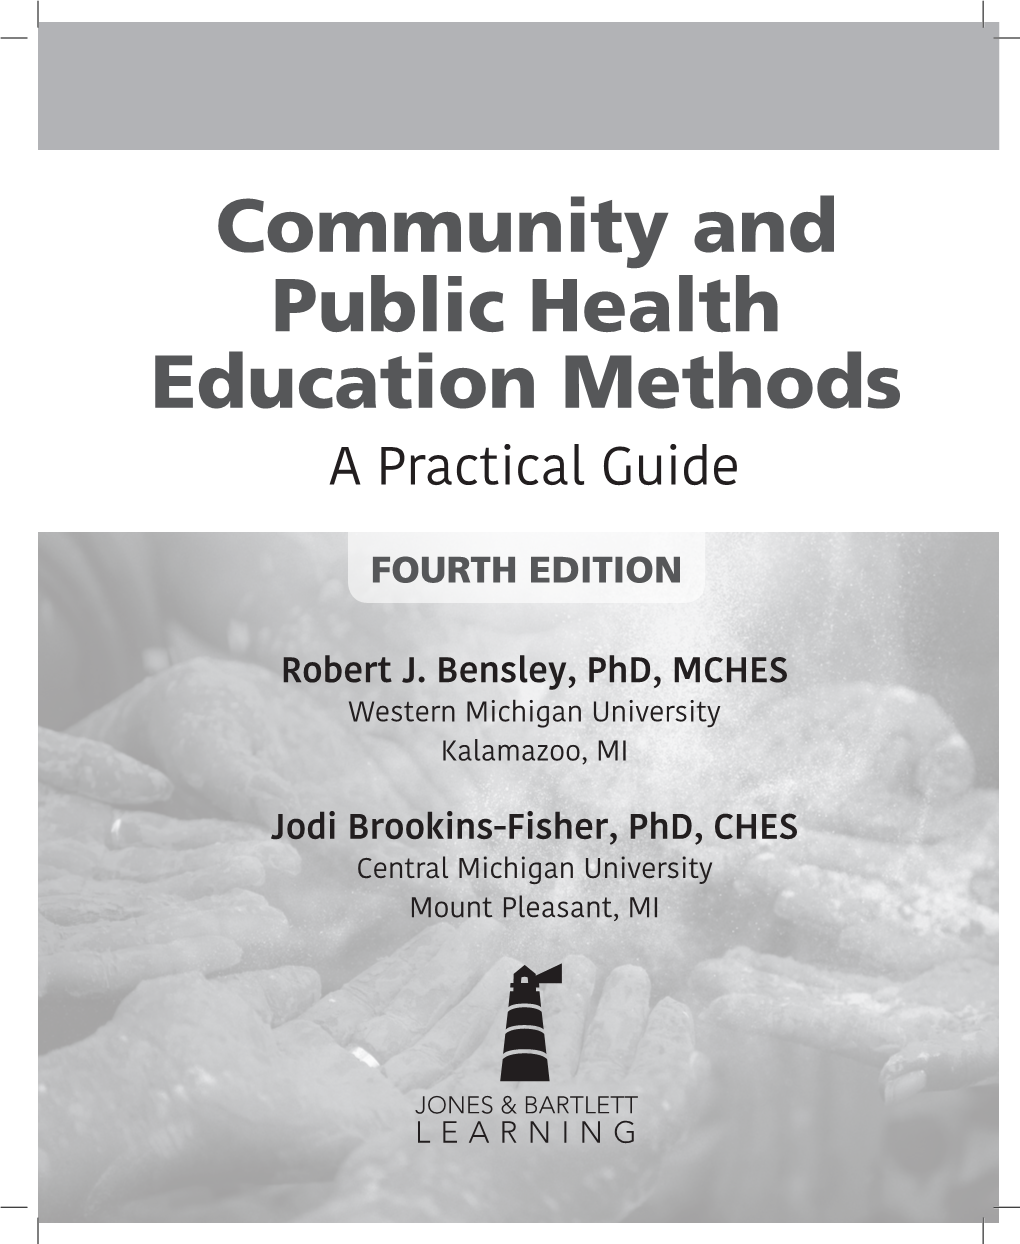 Community and Public Health Education Methods a Practical Guide